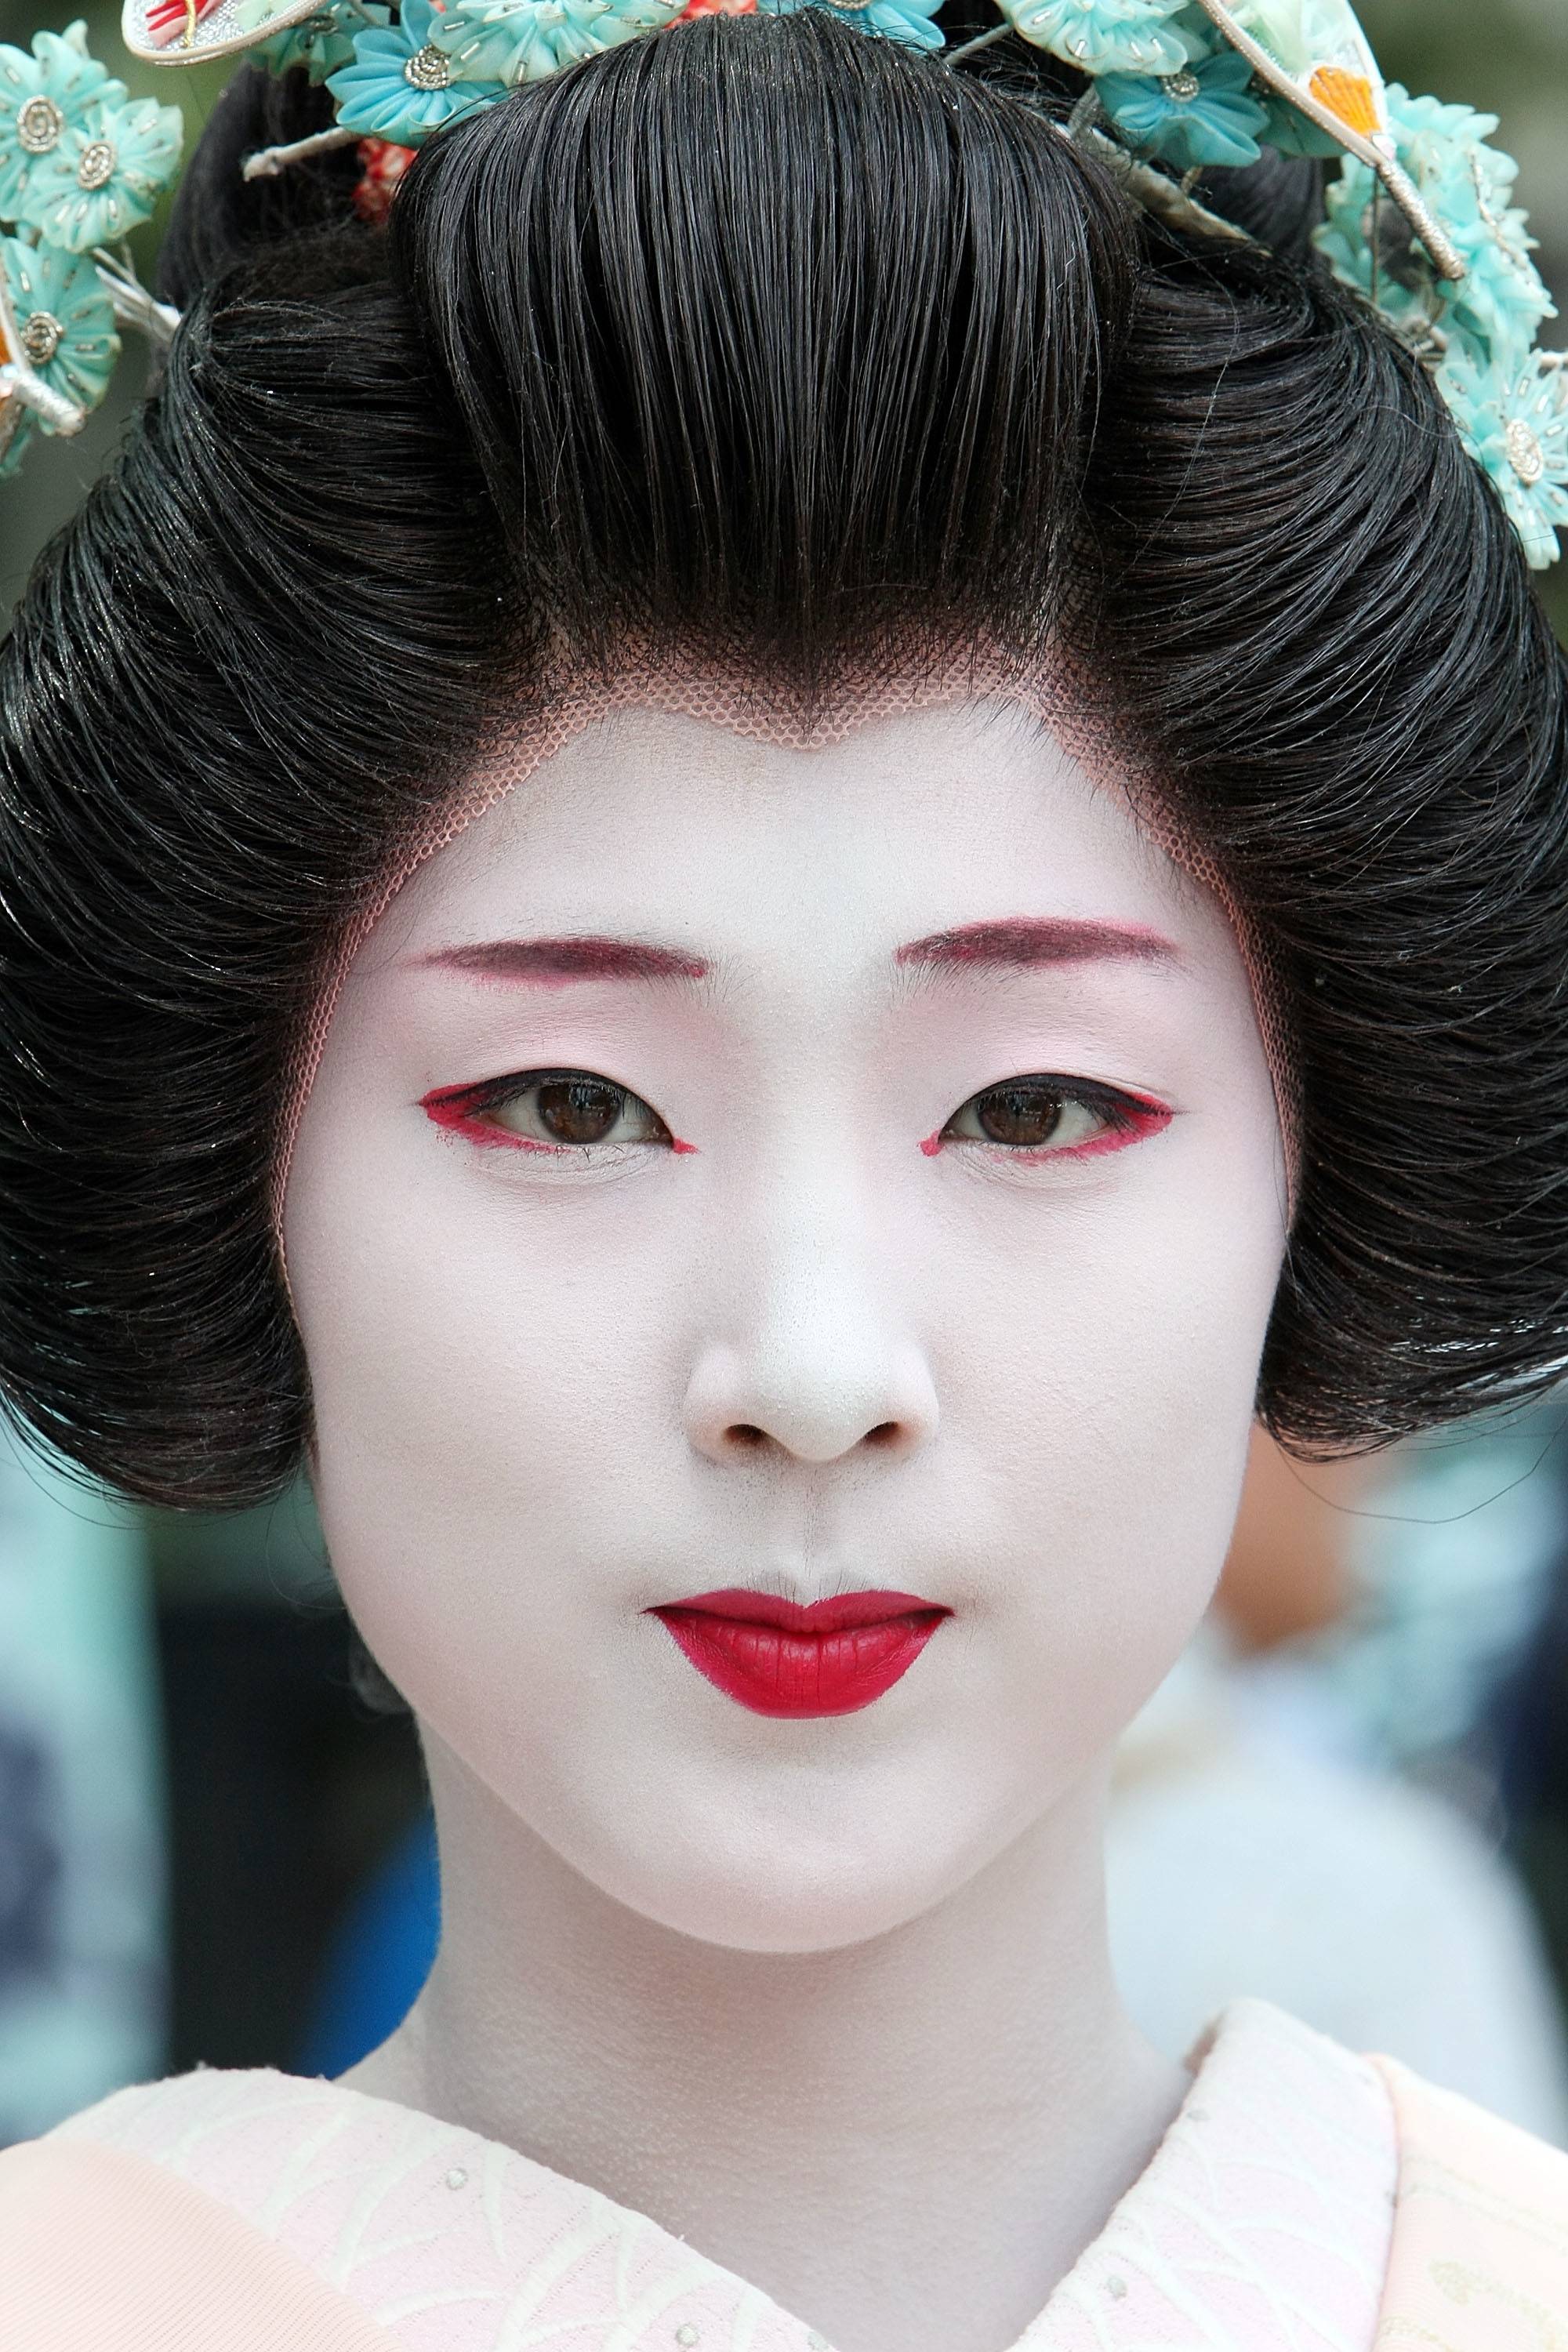 The Japanese traditional occupation– Geisha | Art and history